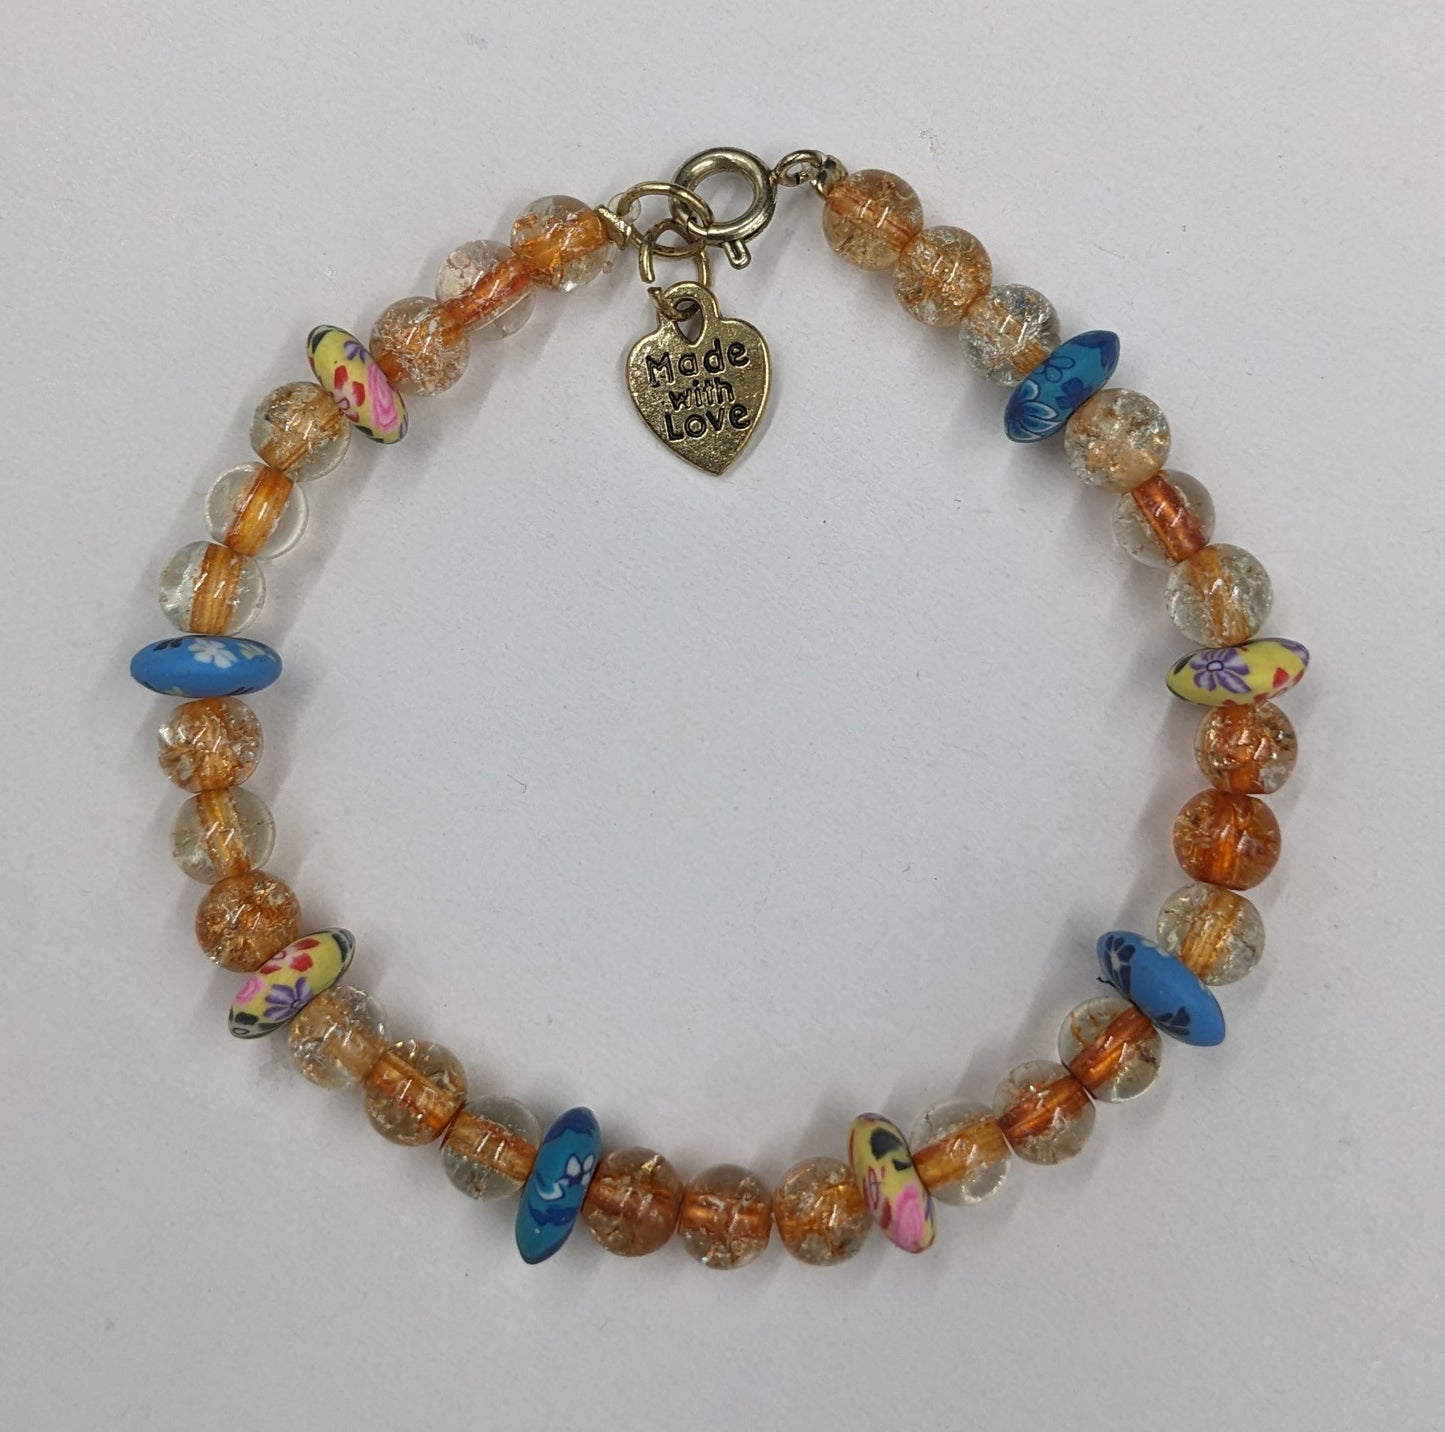 Orange glass beads with floral clay accent beads bracelet